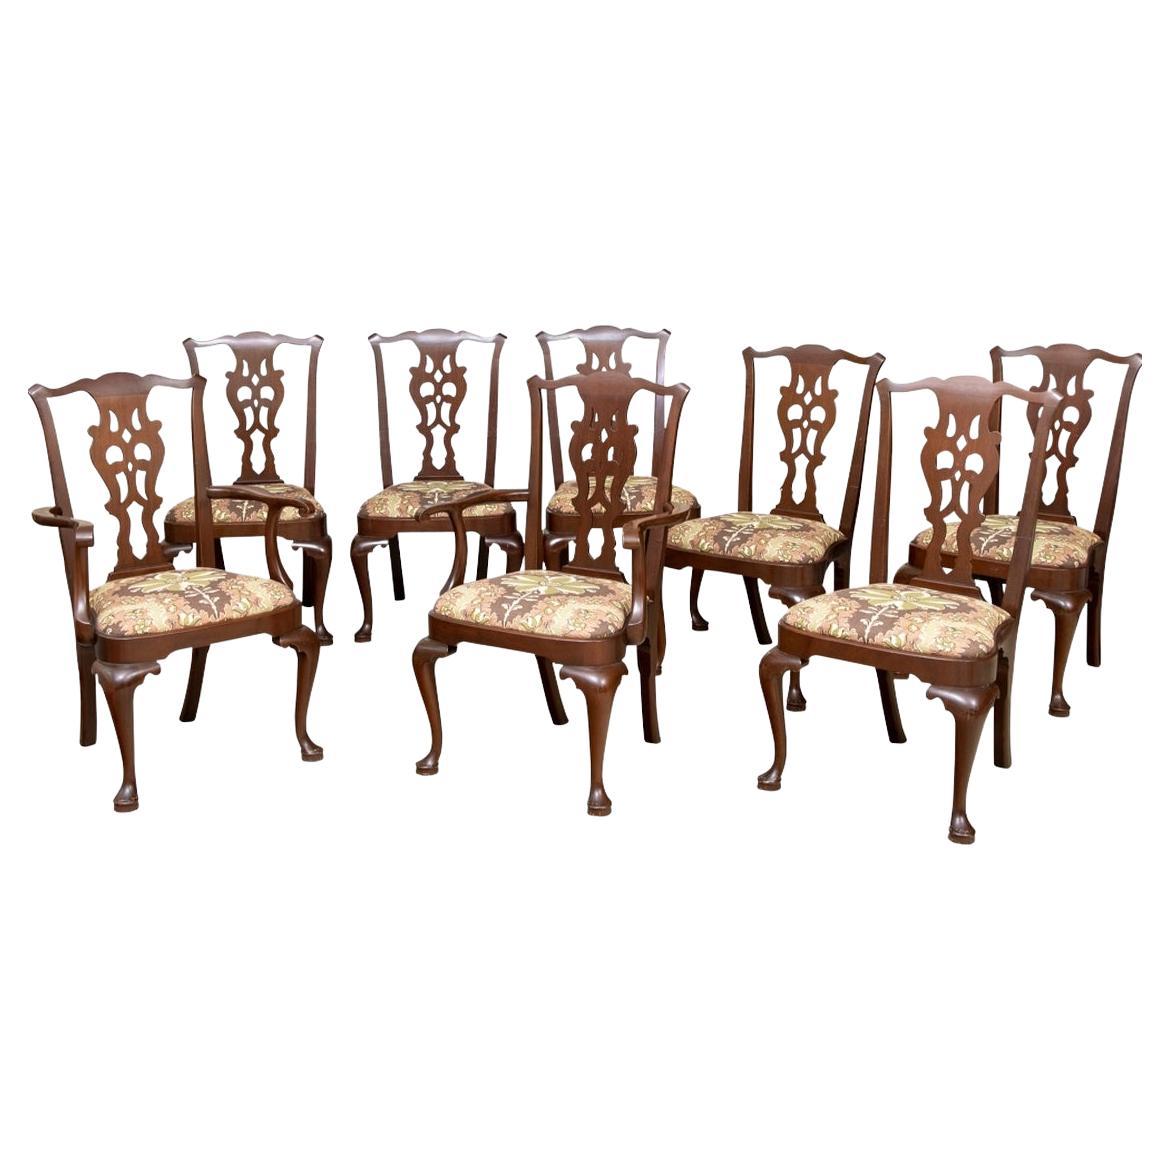 Set of 8 Georgian Style Dining Chairs in Clarence House Fabric